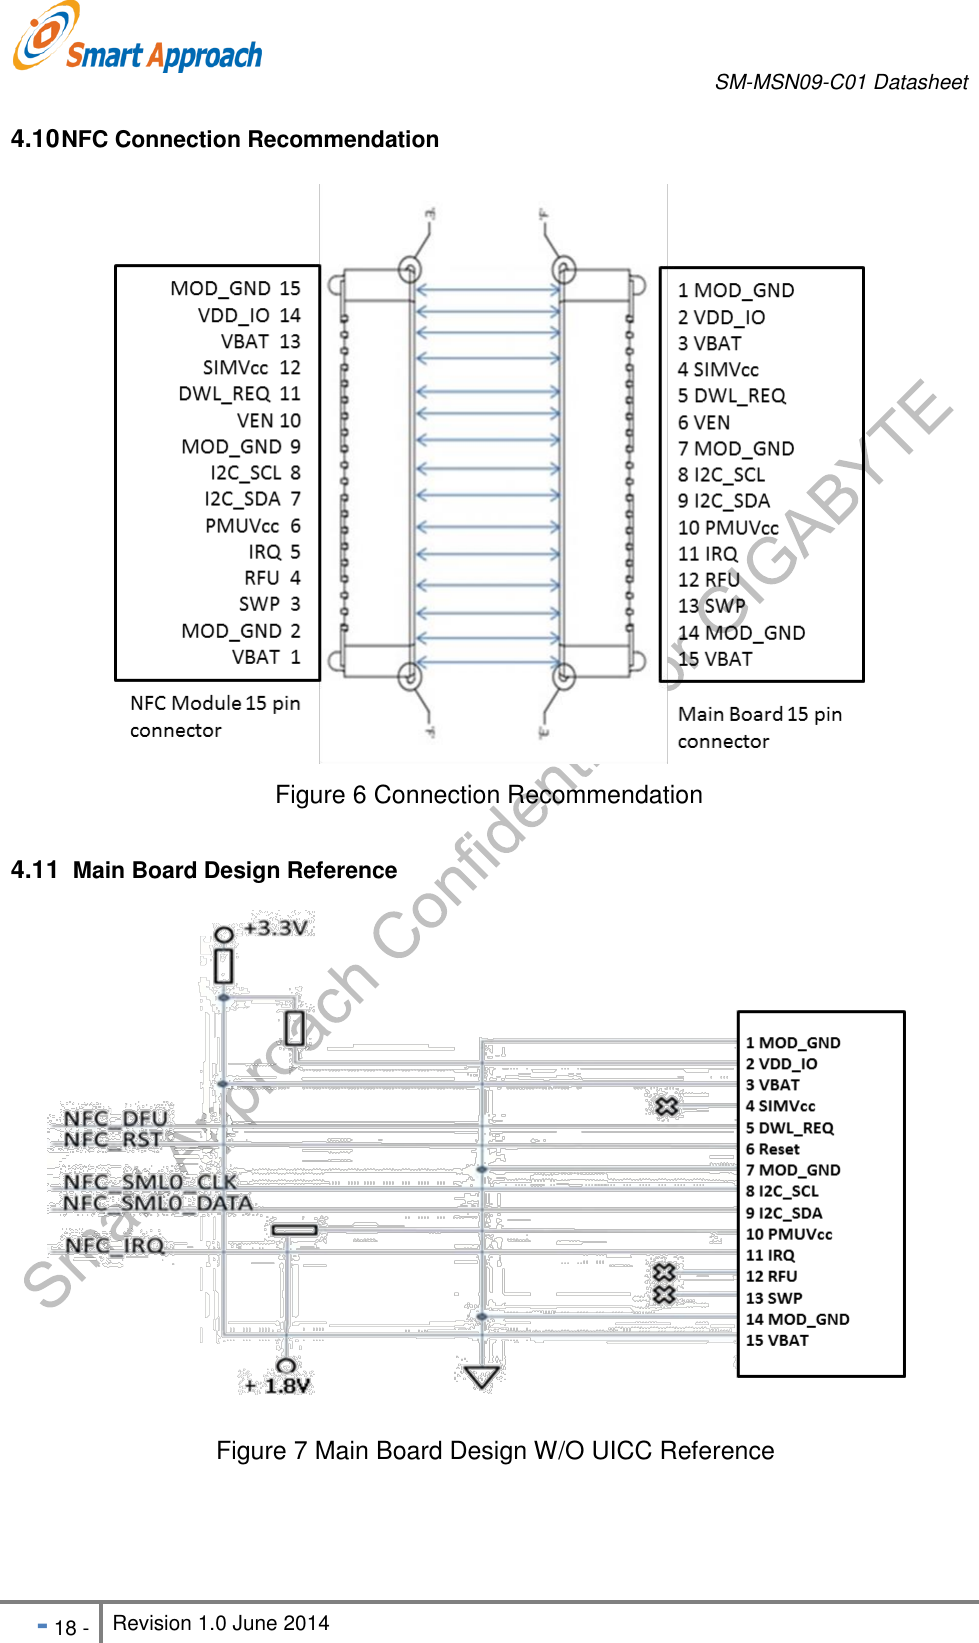       SM-MSN09-C01 Datasheet   - 18 - Revision 1.0 June 2014                                                            4.10 NFC Connection Recommendation  Figure 6 Connection Recommendation  4.11   Main Board Design Reference      Figure 7 Main Board Design W/O UICC Reference    